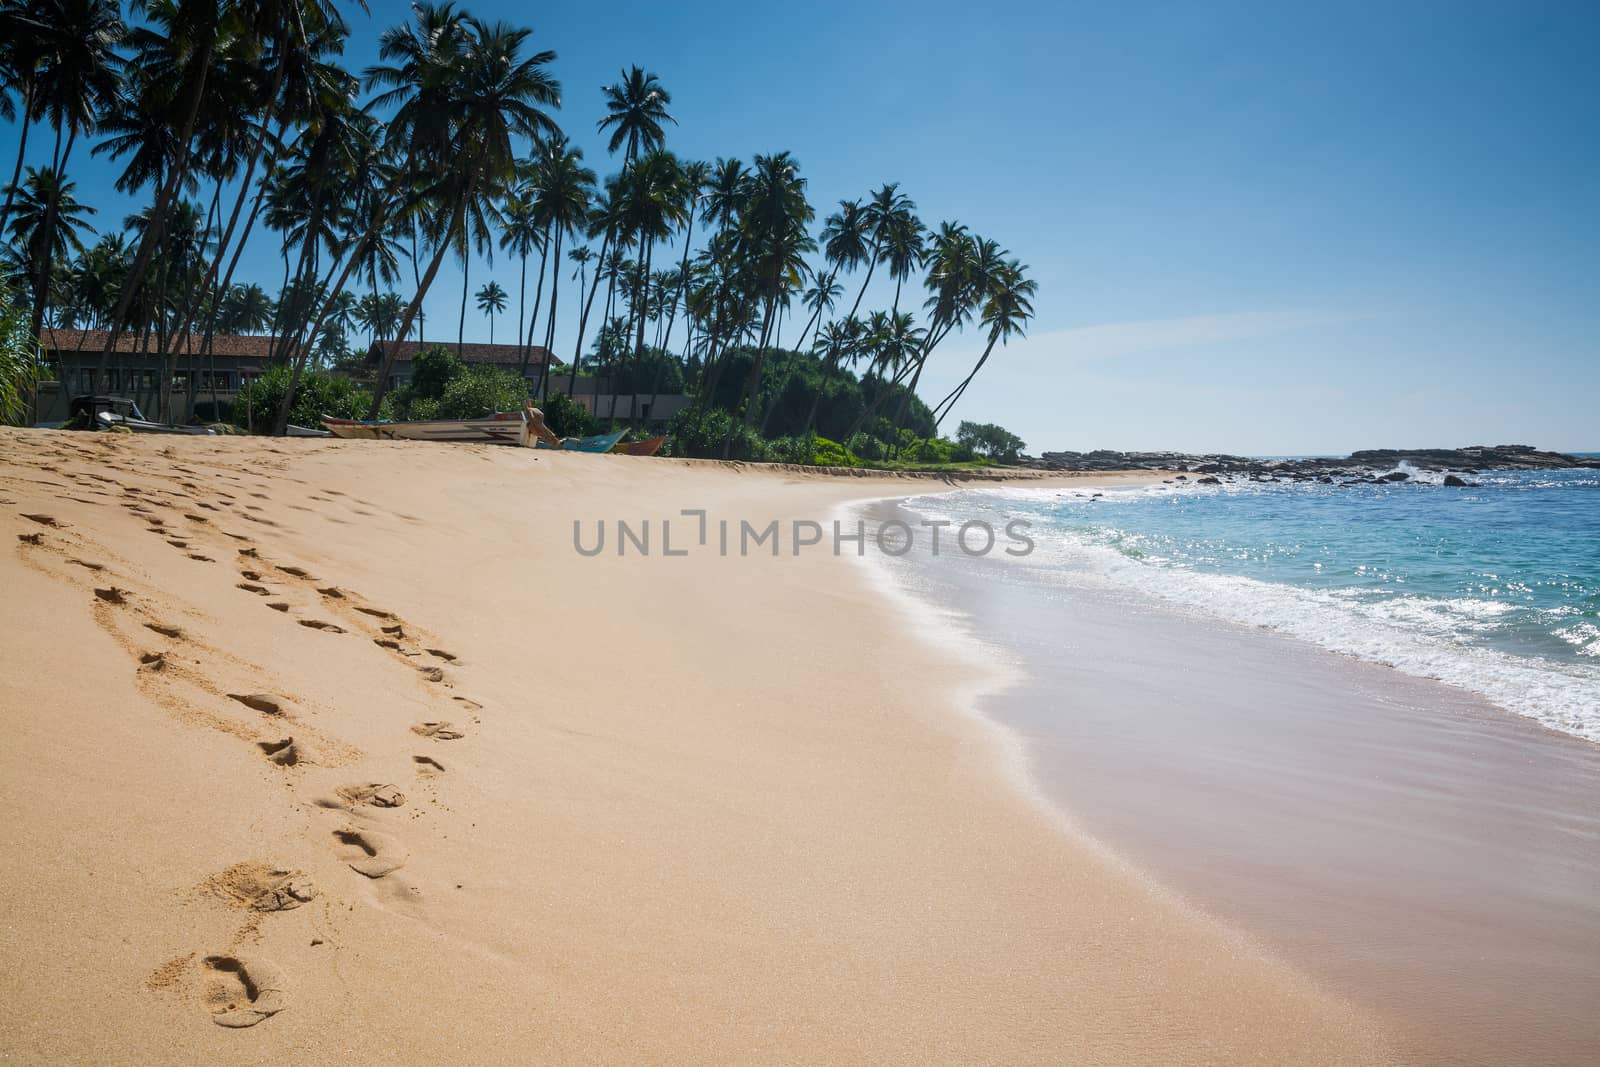 Paradise beach with coconut trees and footprints in golden sand, Tangalle, Southern Province, Sri Lanka, Asia.